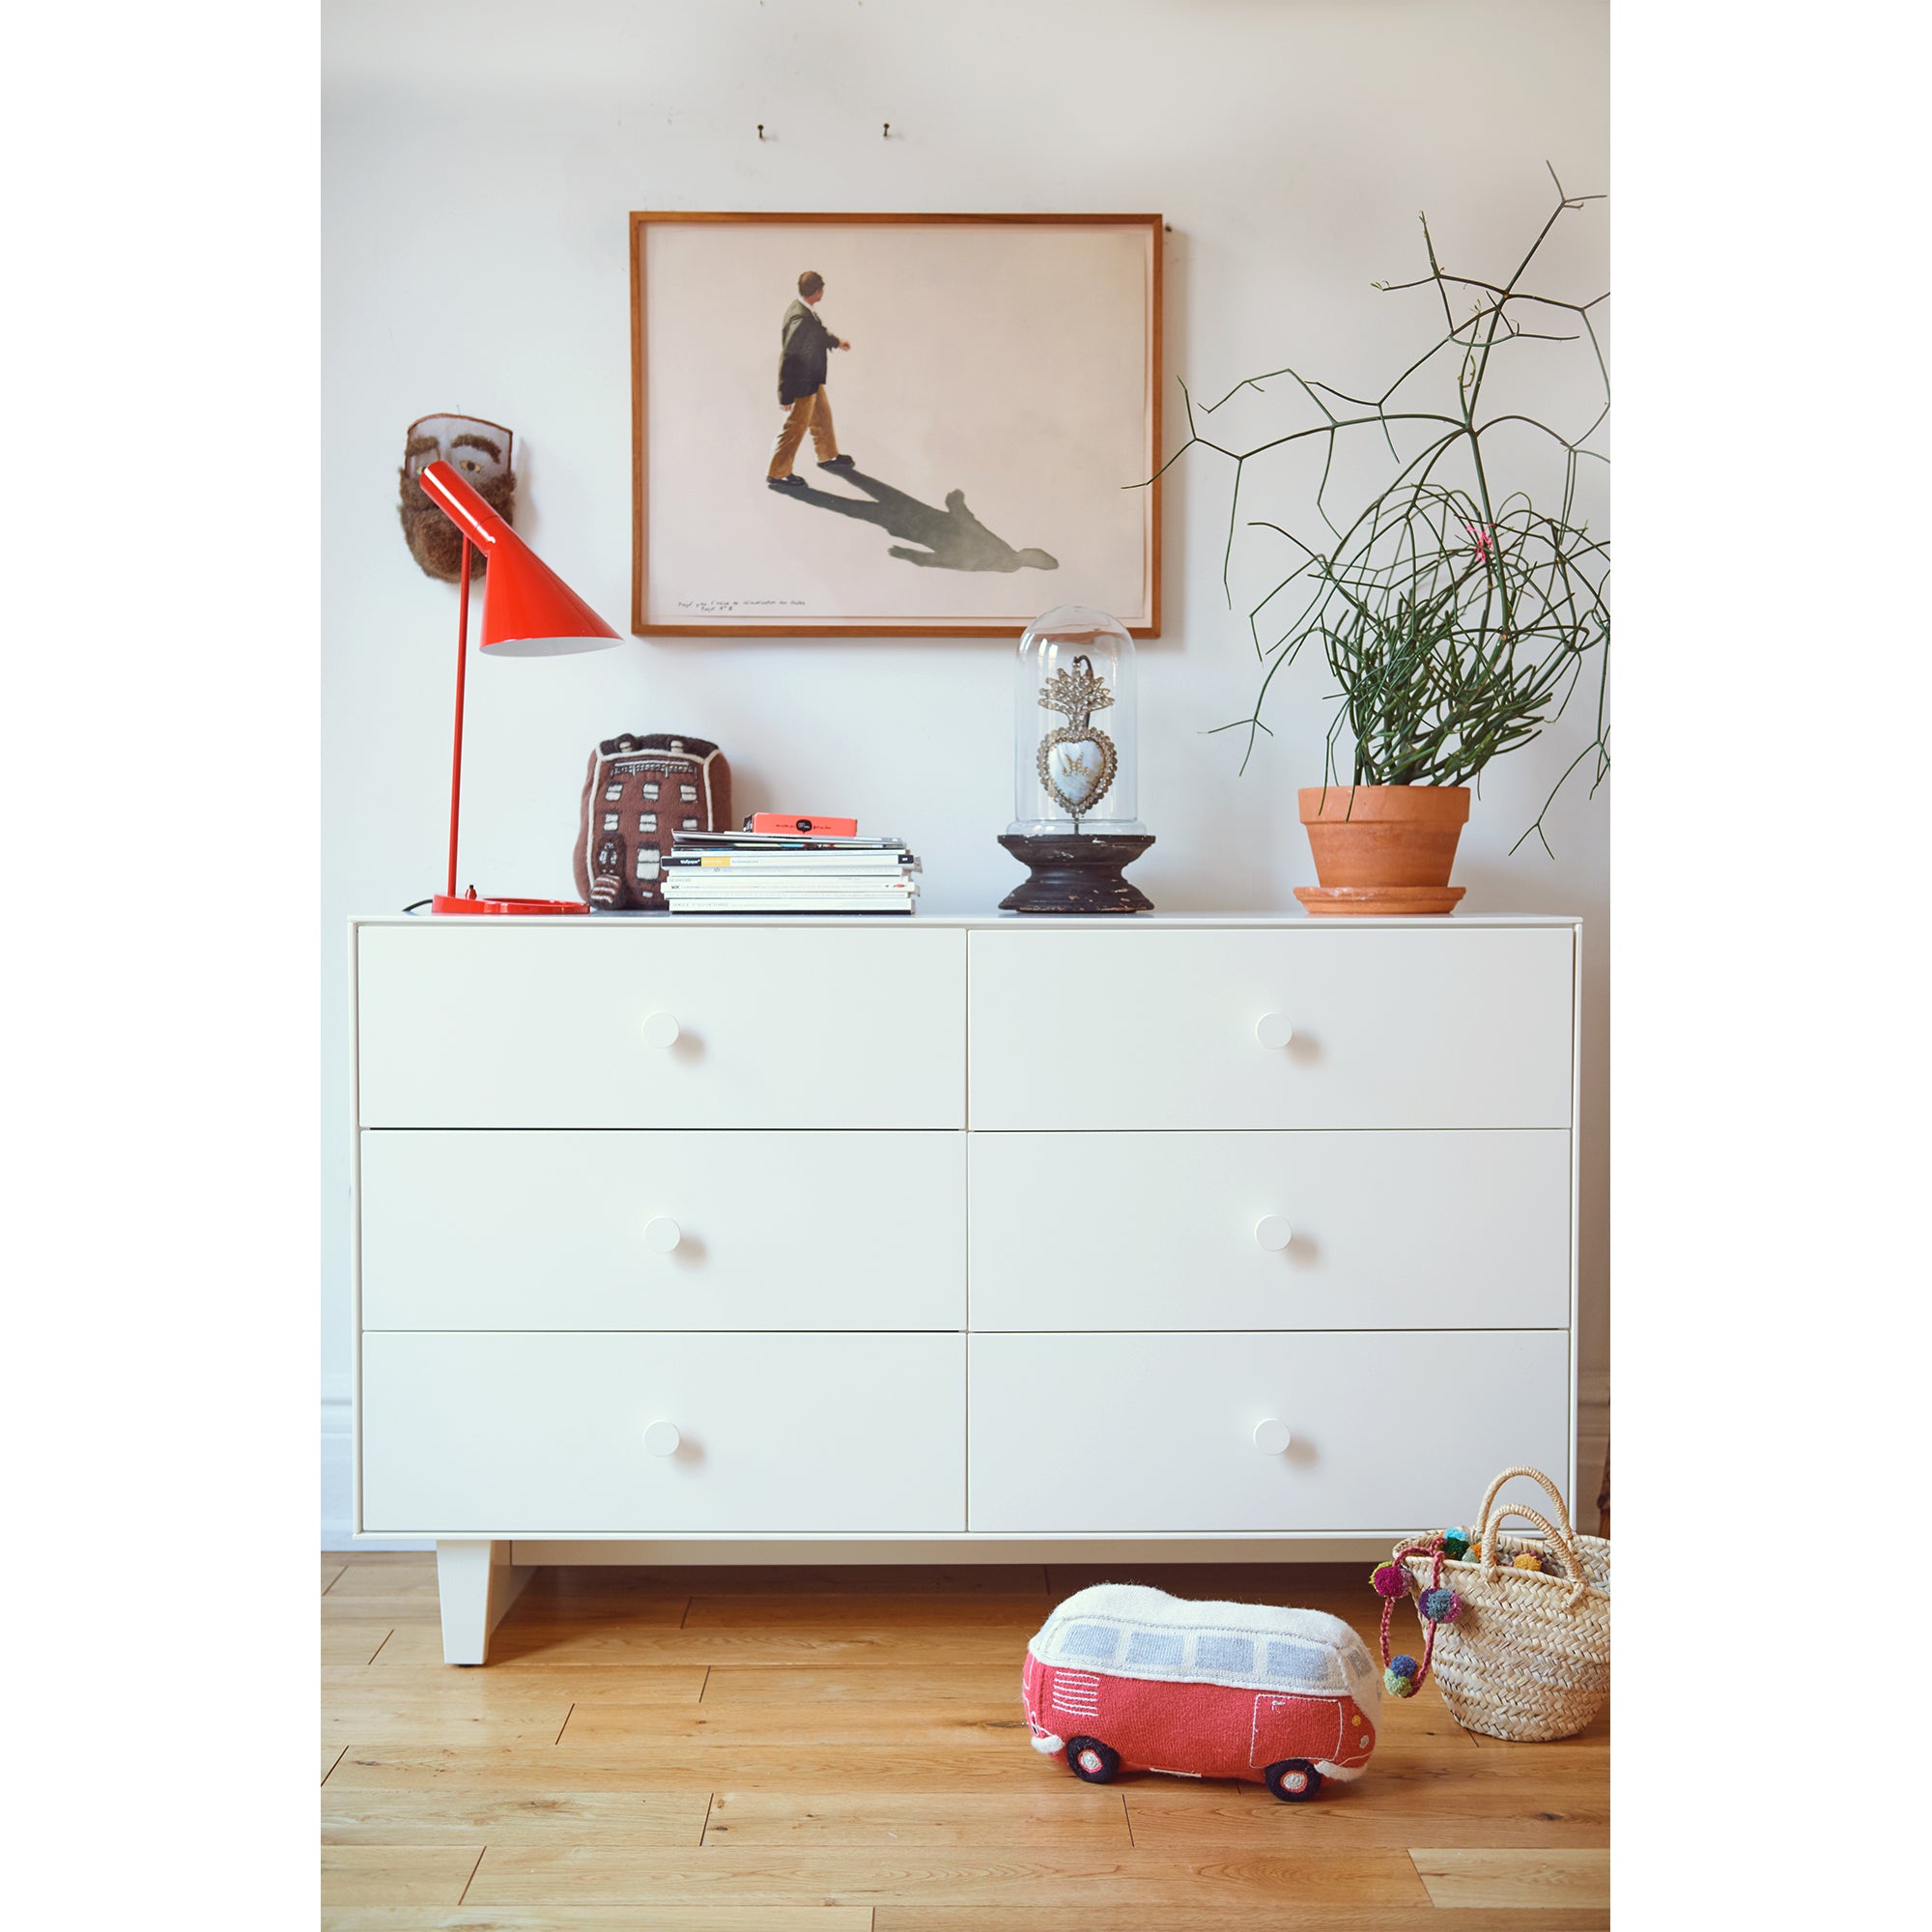 Oeuf Merlin 6 Drawer Dresser White (Pre-Order; Est. Delivery in 2-3 Months)